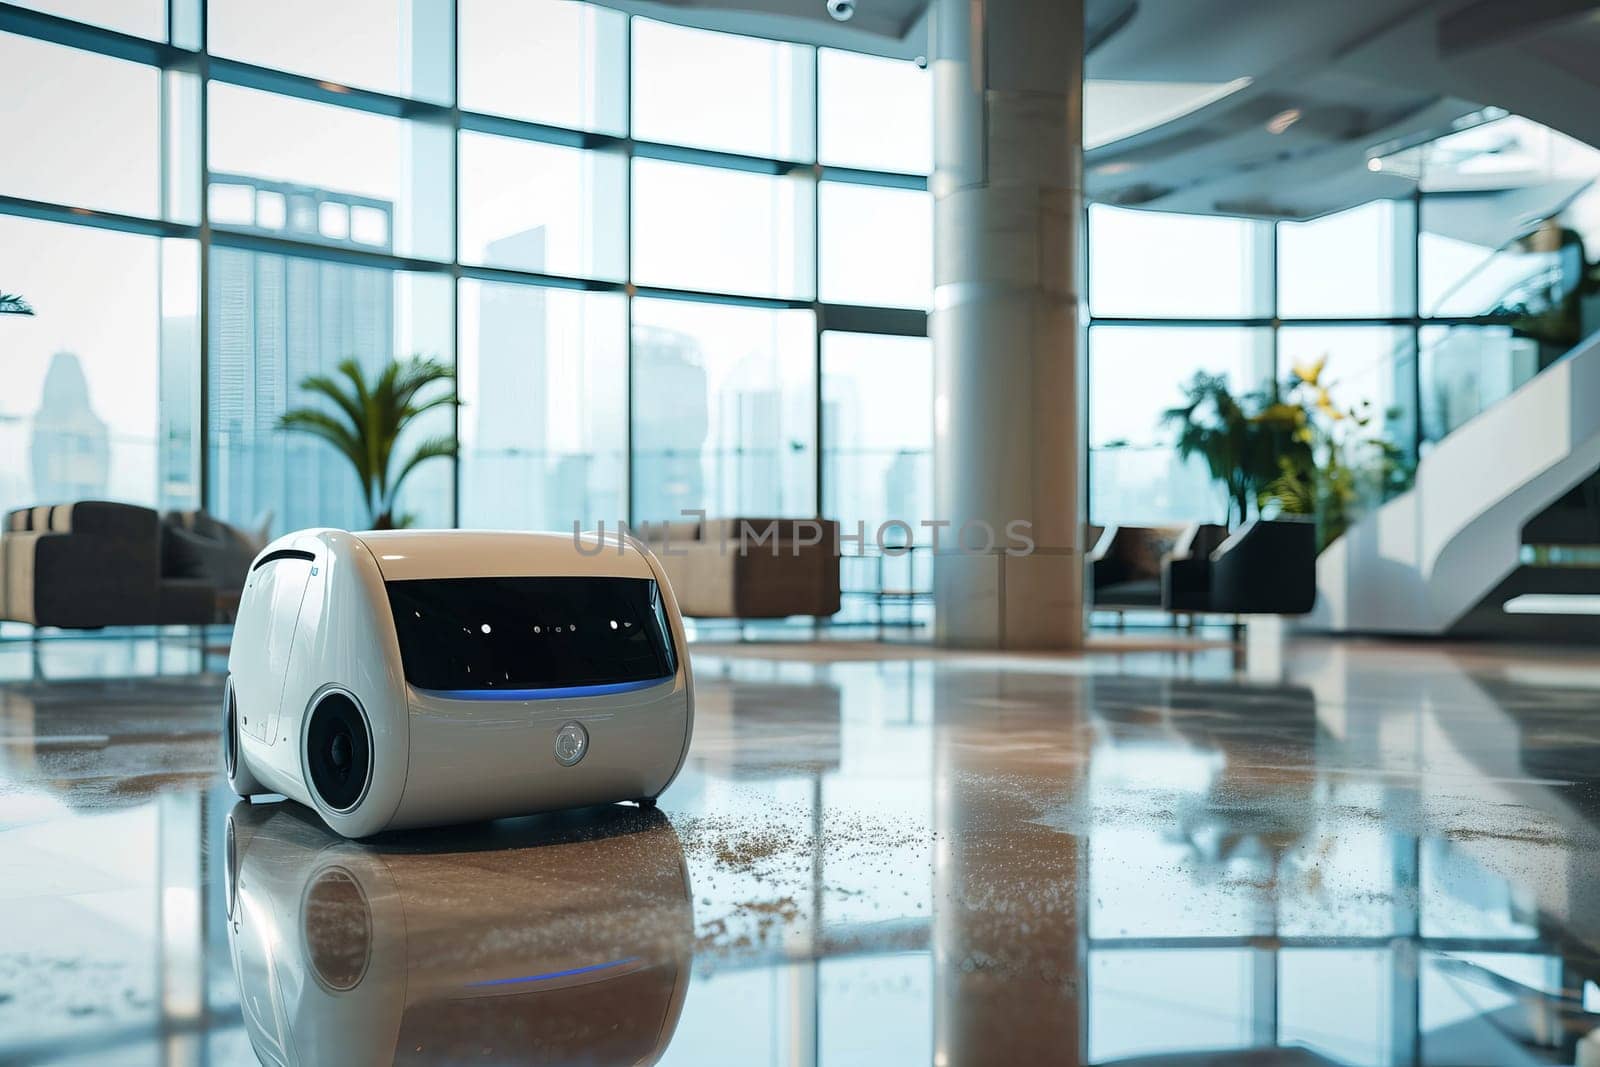 Futuristic robot washing machine is washing office floor in background of modern business office